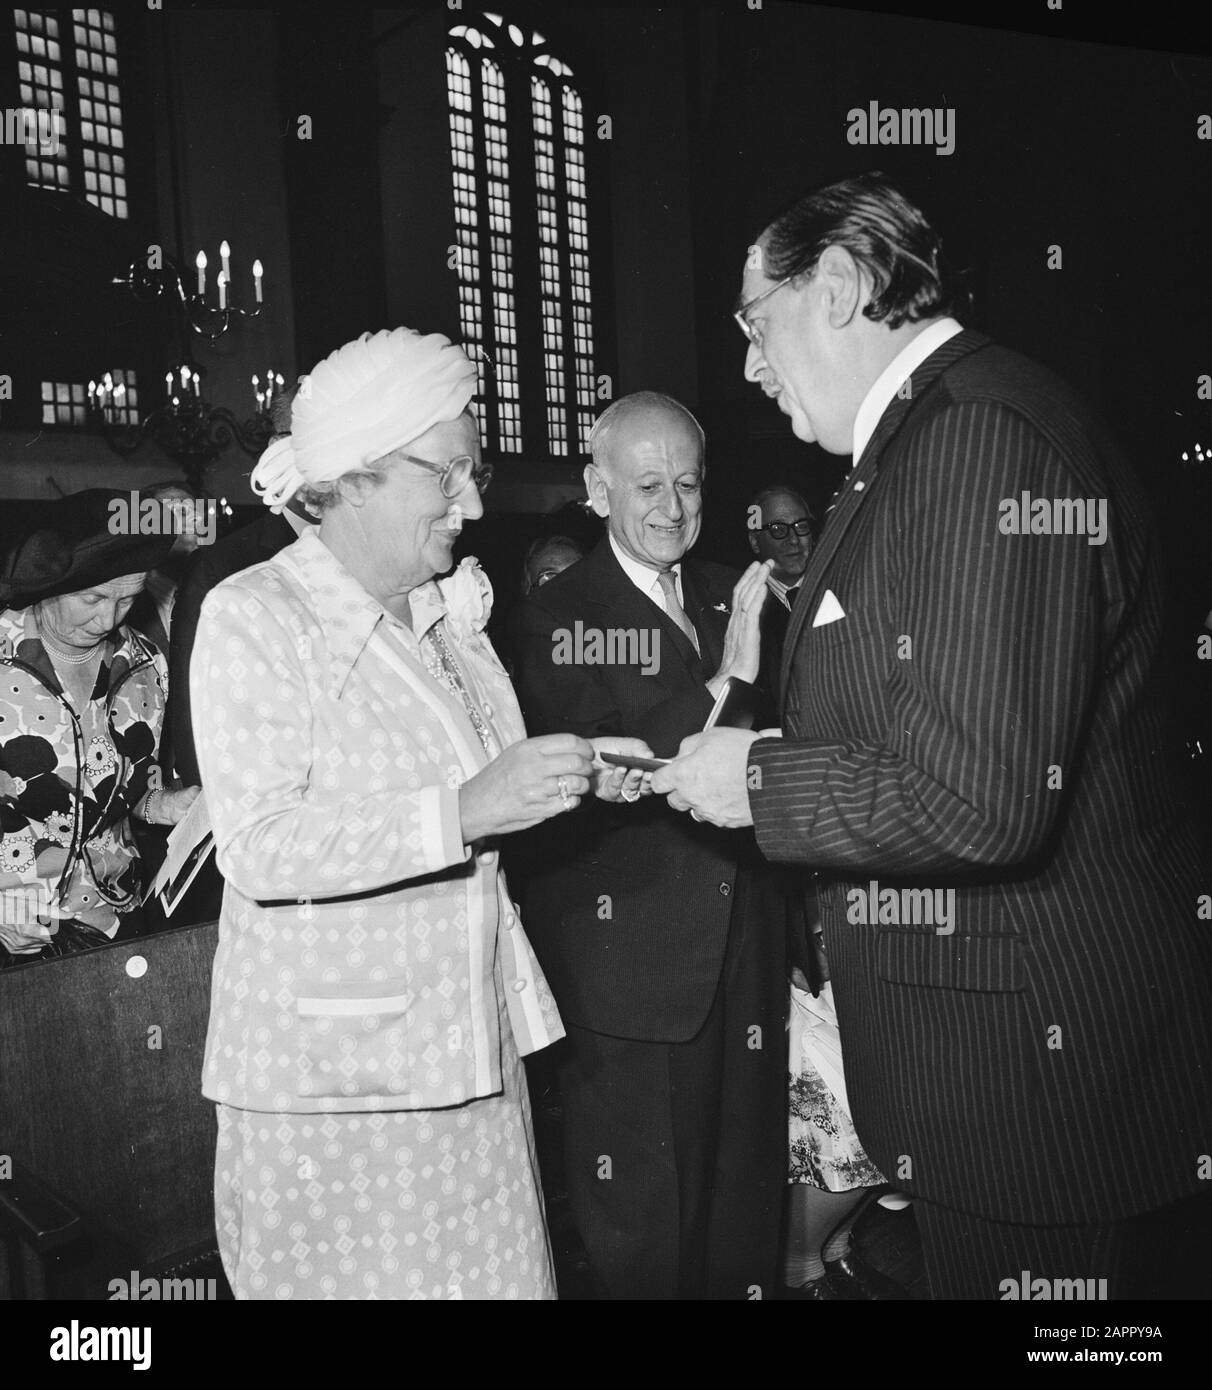 Overview during duty; Queen Juliana receives badge from Schuttenhelm, middle prof. Muntendam Date: 31 August 1974 Keywords: services, queens Personal name: Juliana (Queen Netherlands), Juliana, queen Stock Photo